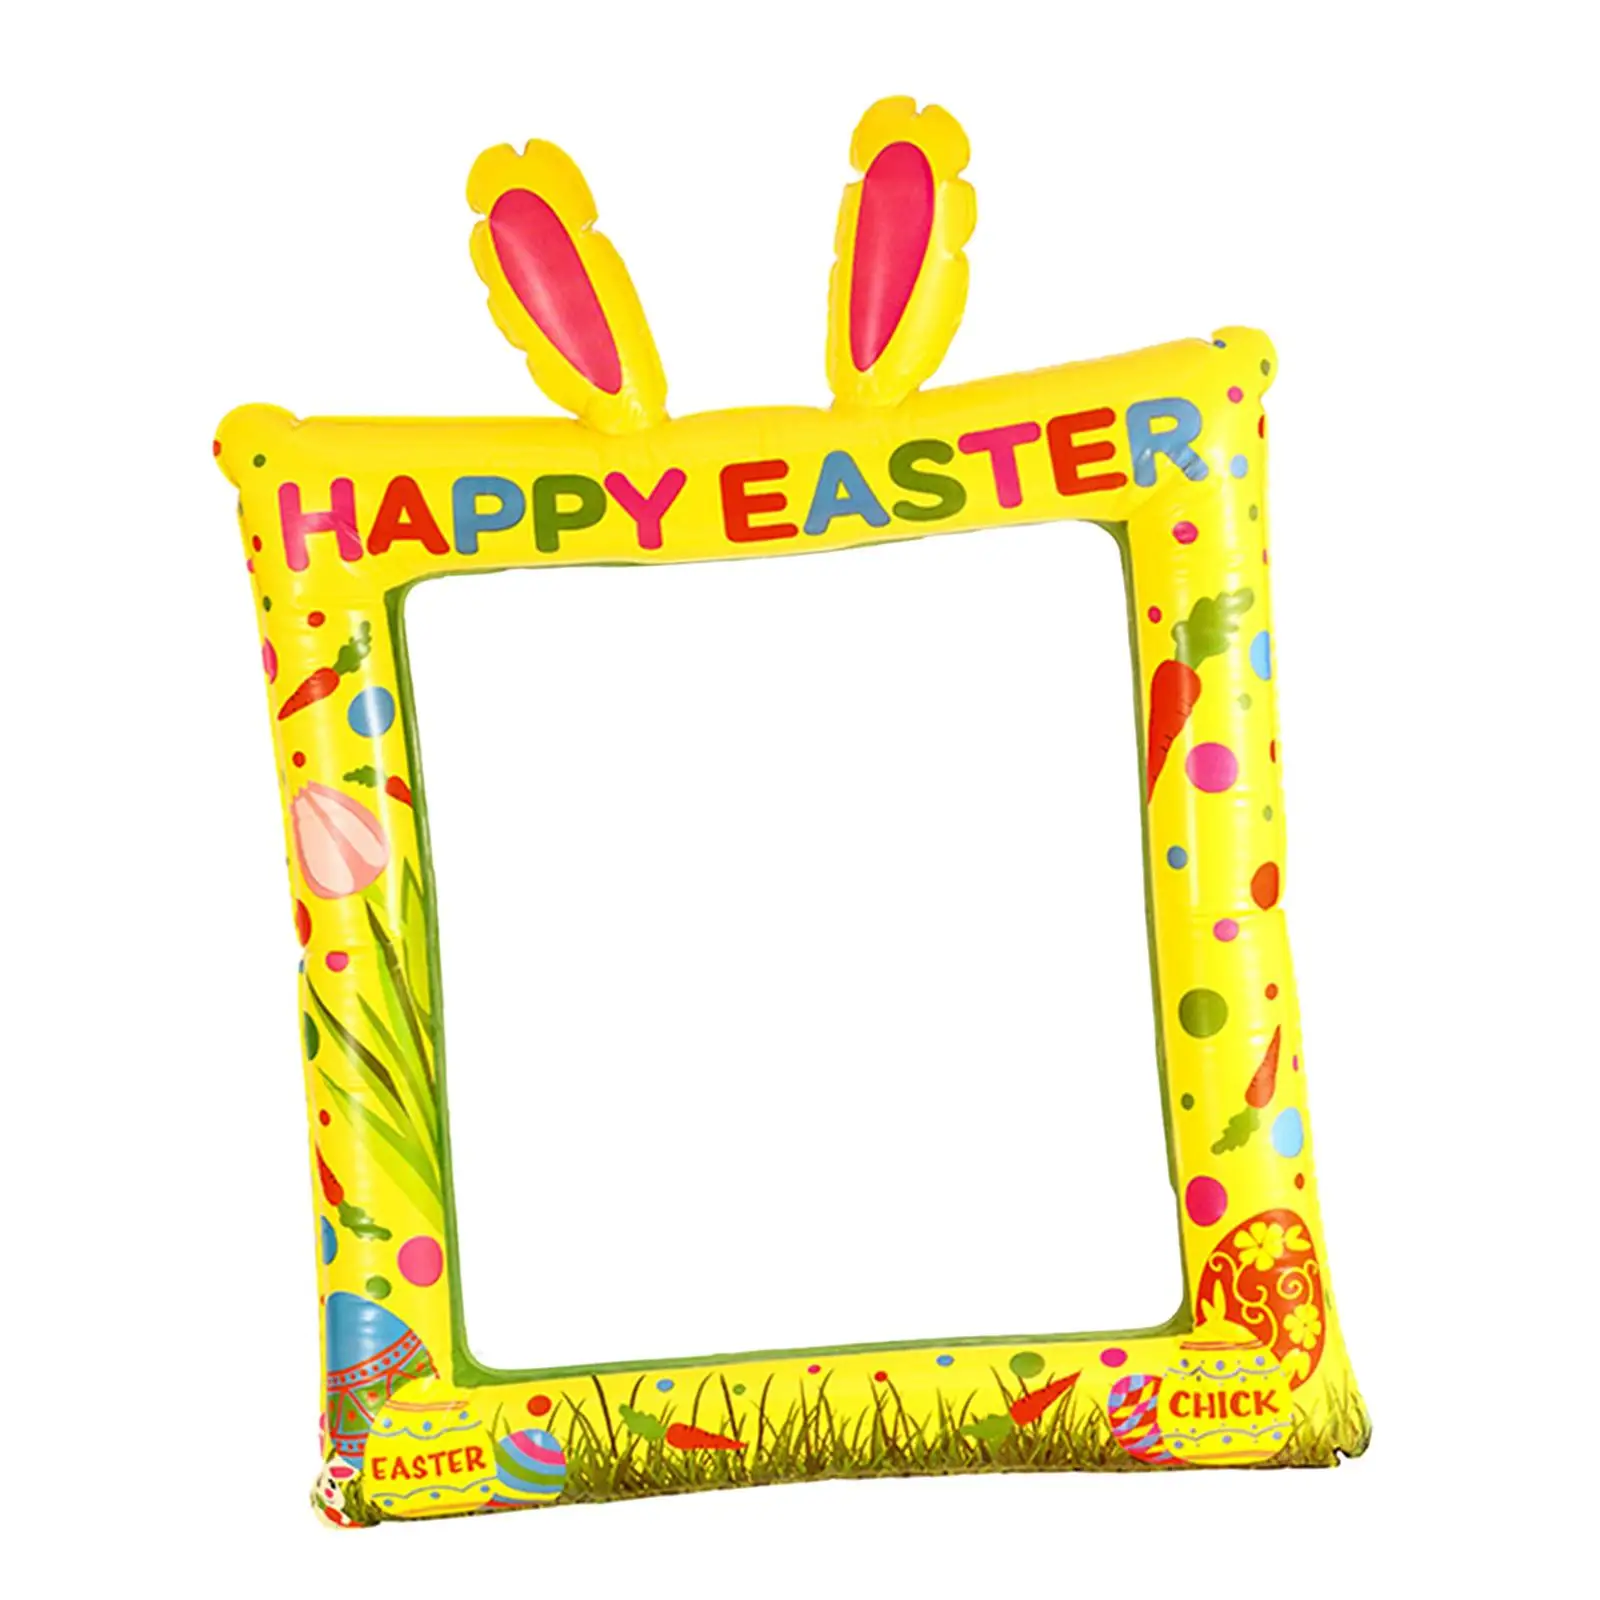 PVC Inflatable Photo Frame Inflatable Selfie Picture Frame for Easter Party Decor